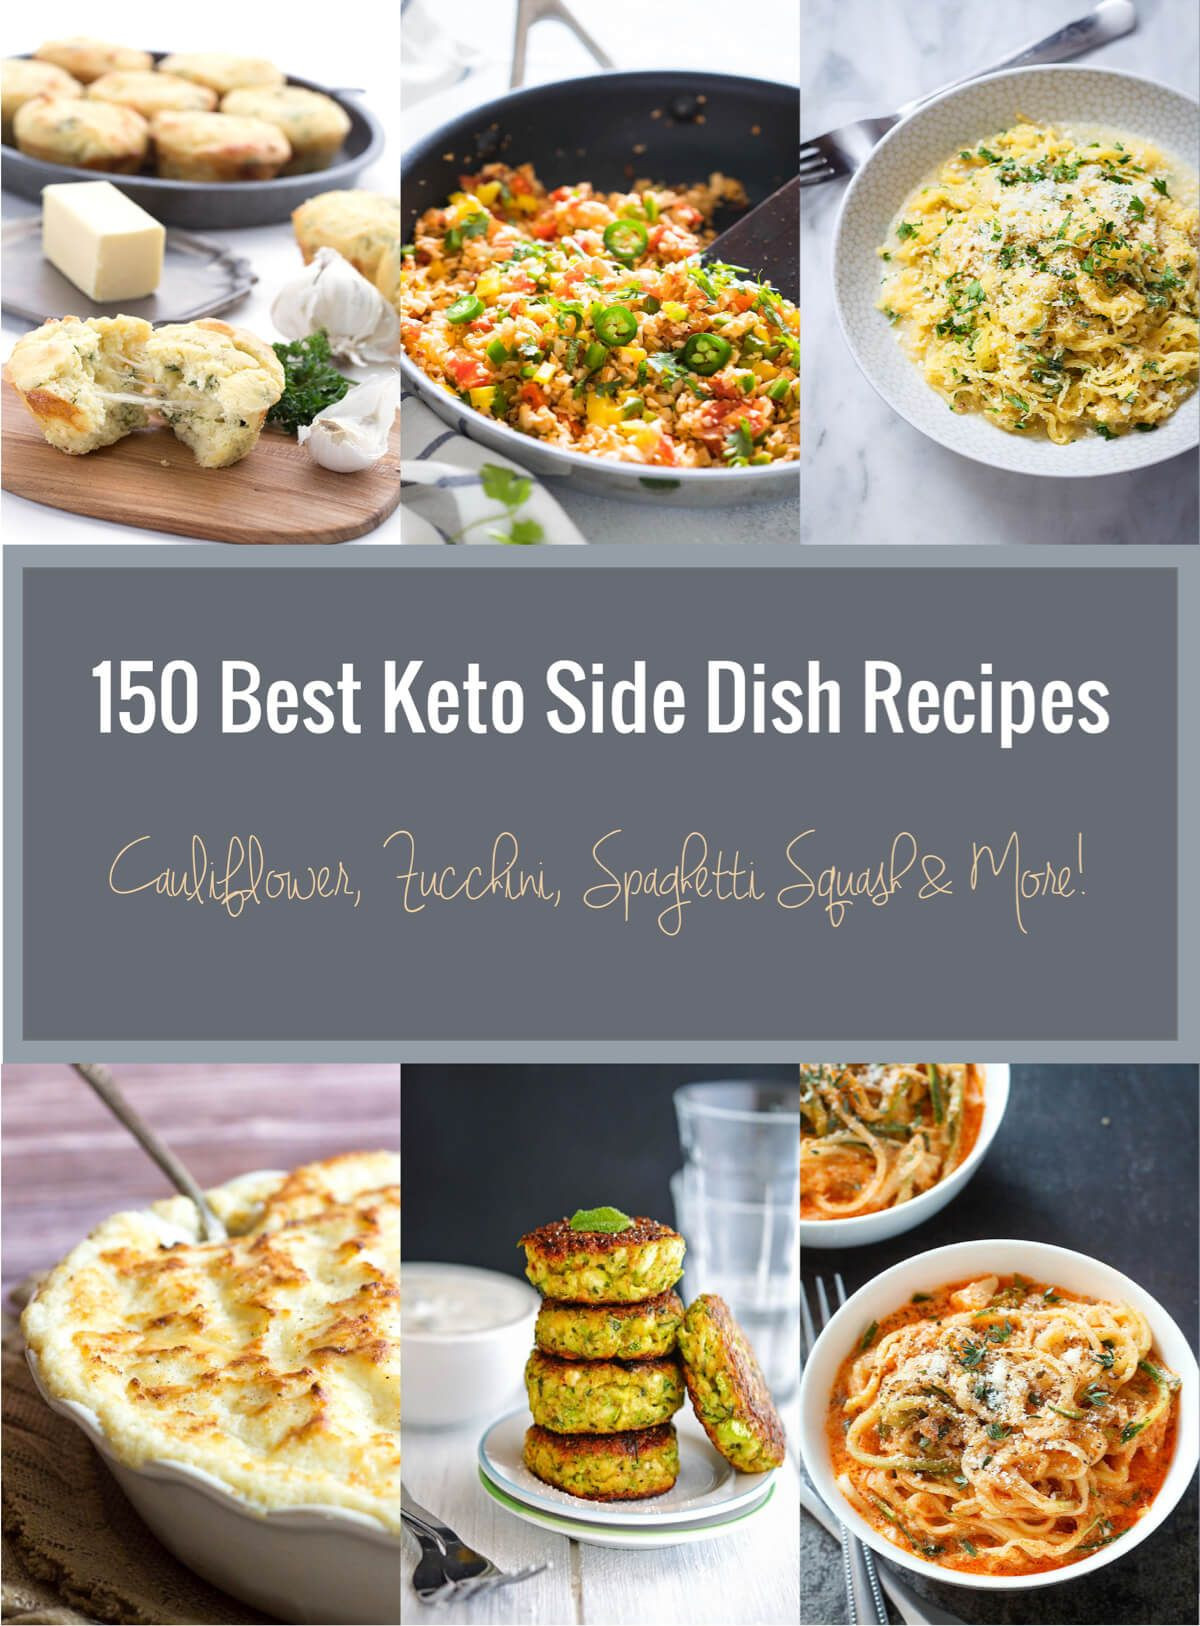 Healthy Keto Side Dishes
 150 Best Keto Side Dish Recipes Low Carb